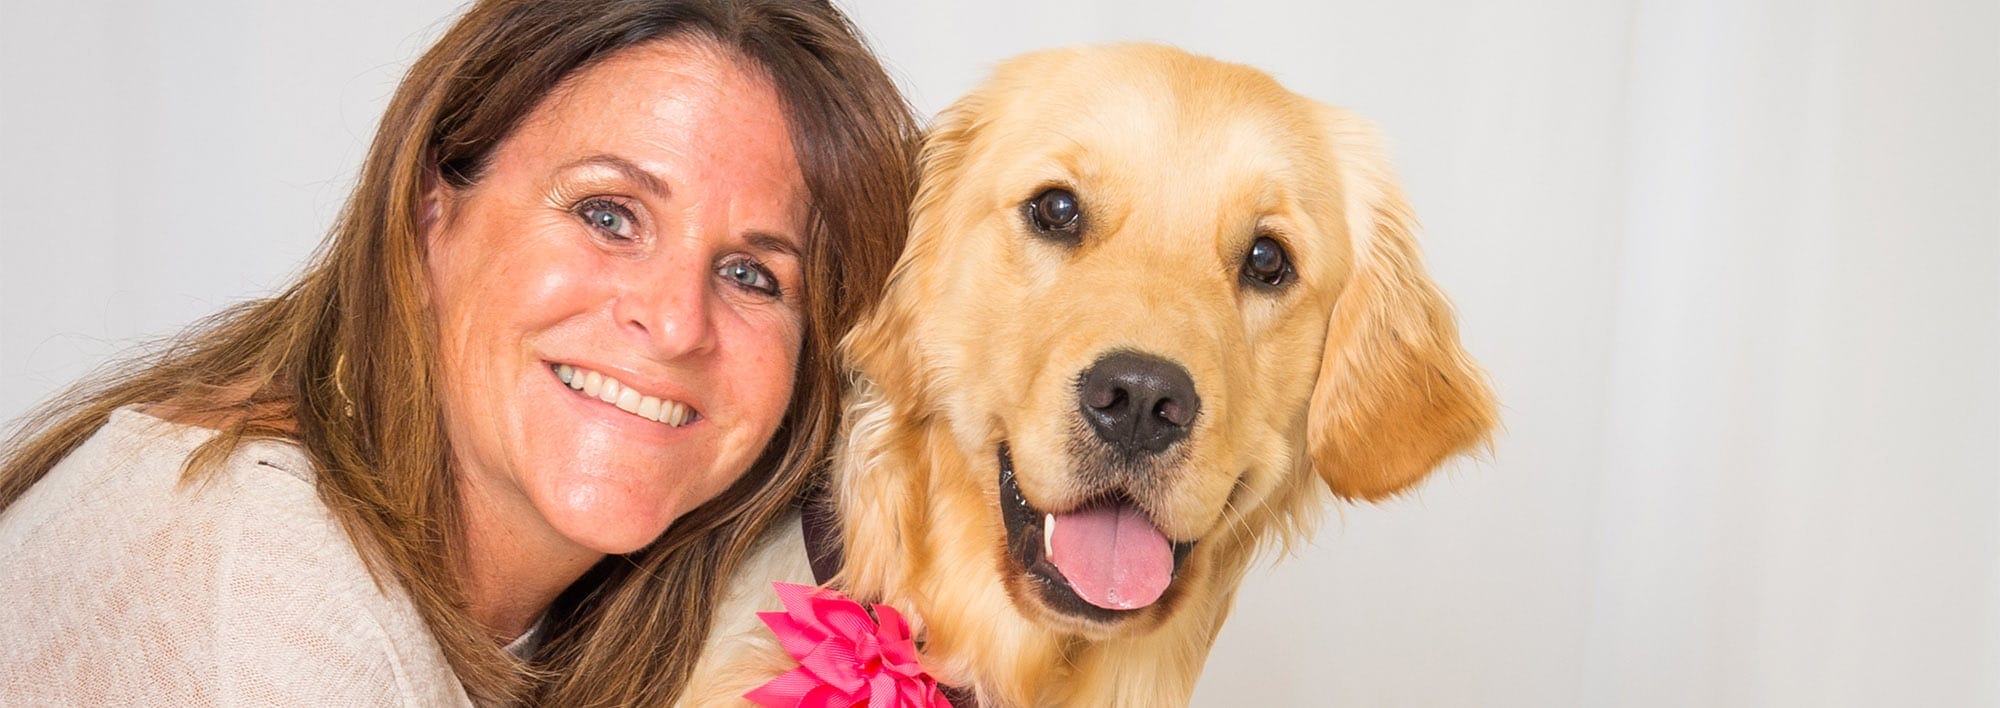 Woman smiling with golden retriever at her side.